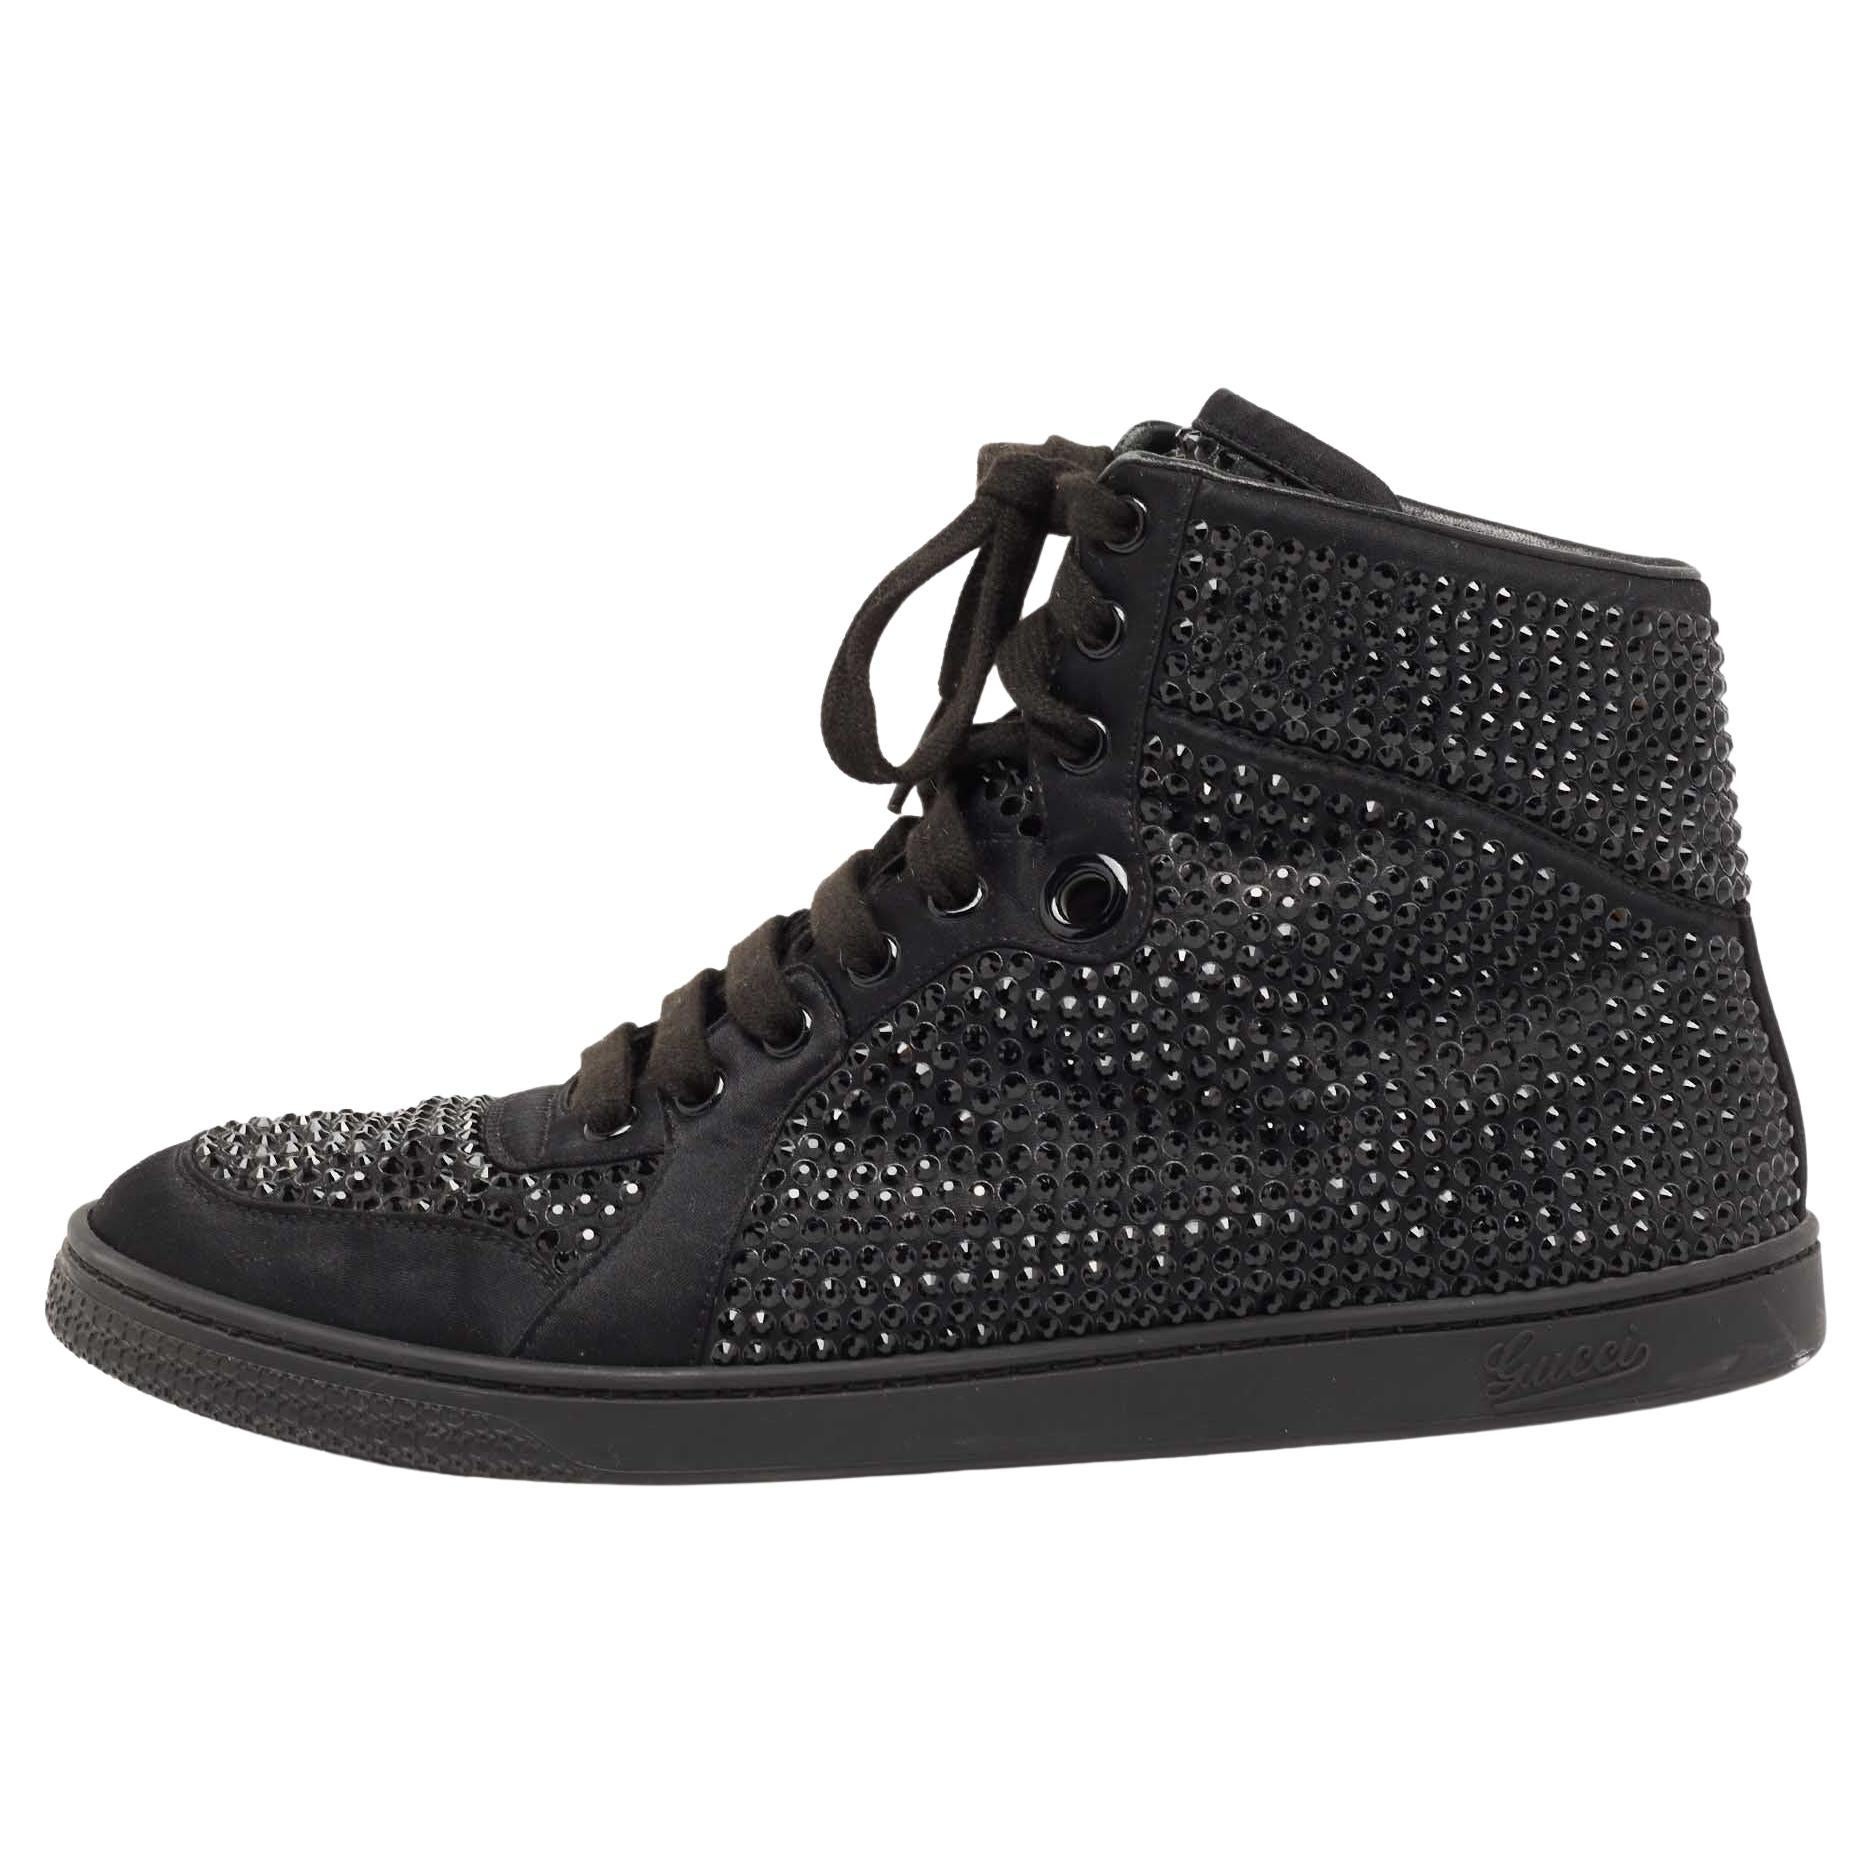 Gucci Black Satin Crystal Embellished Coda High Top Sneakers Size 39 For Sale